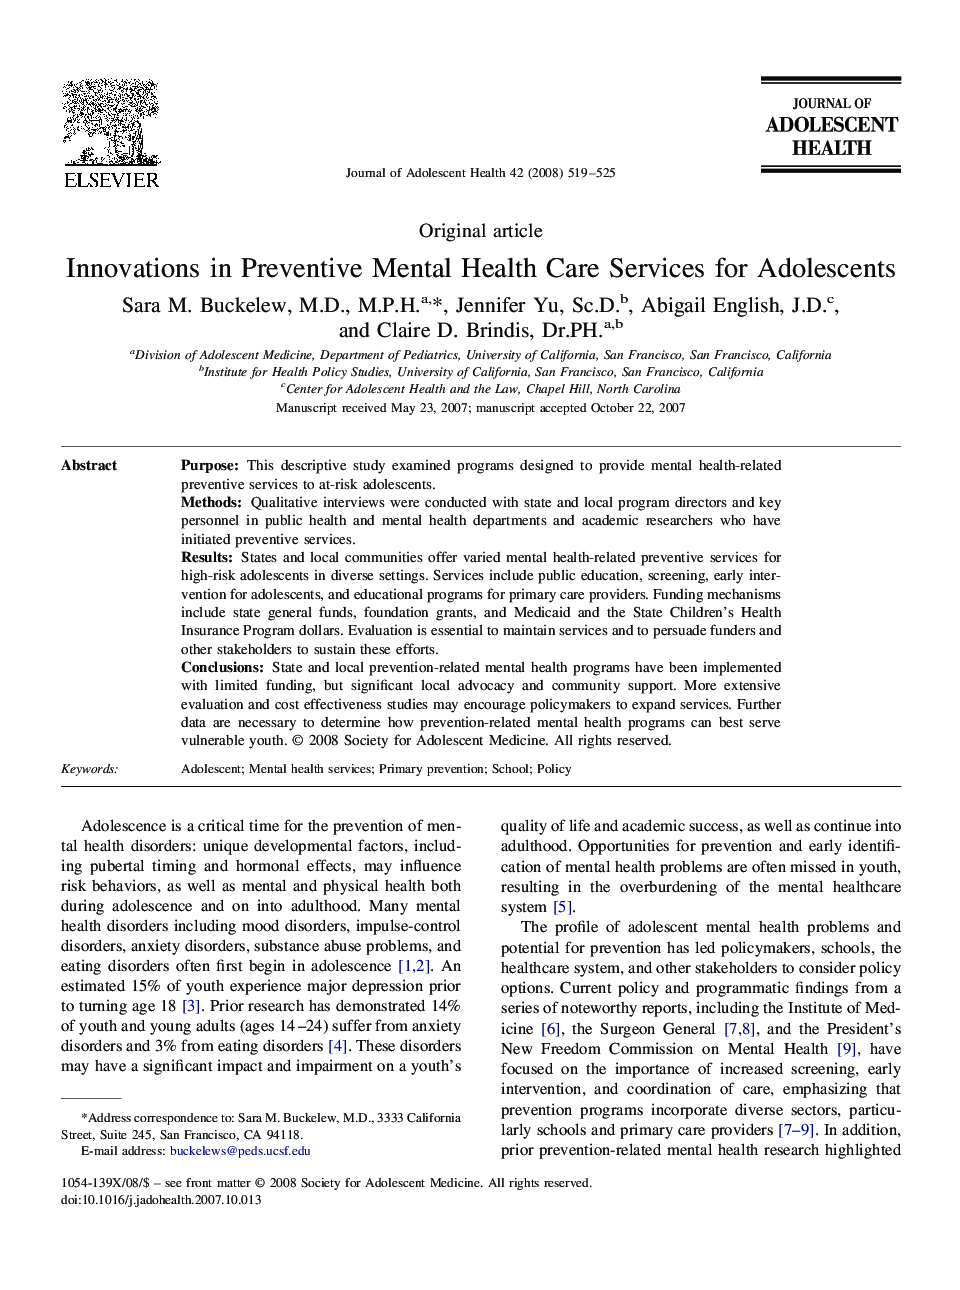 Innovations in Preventive Mental Health Care Services for Adolescents